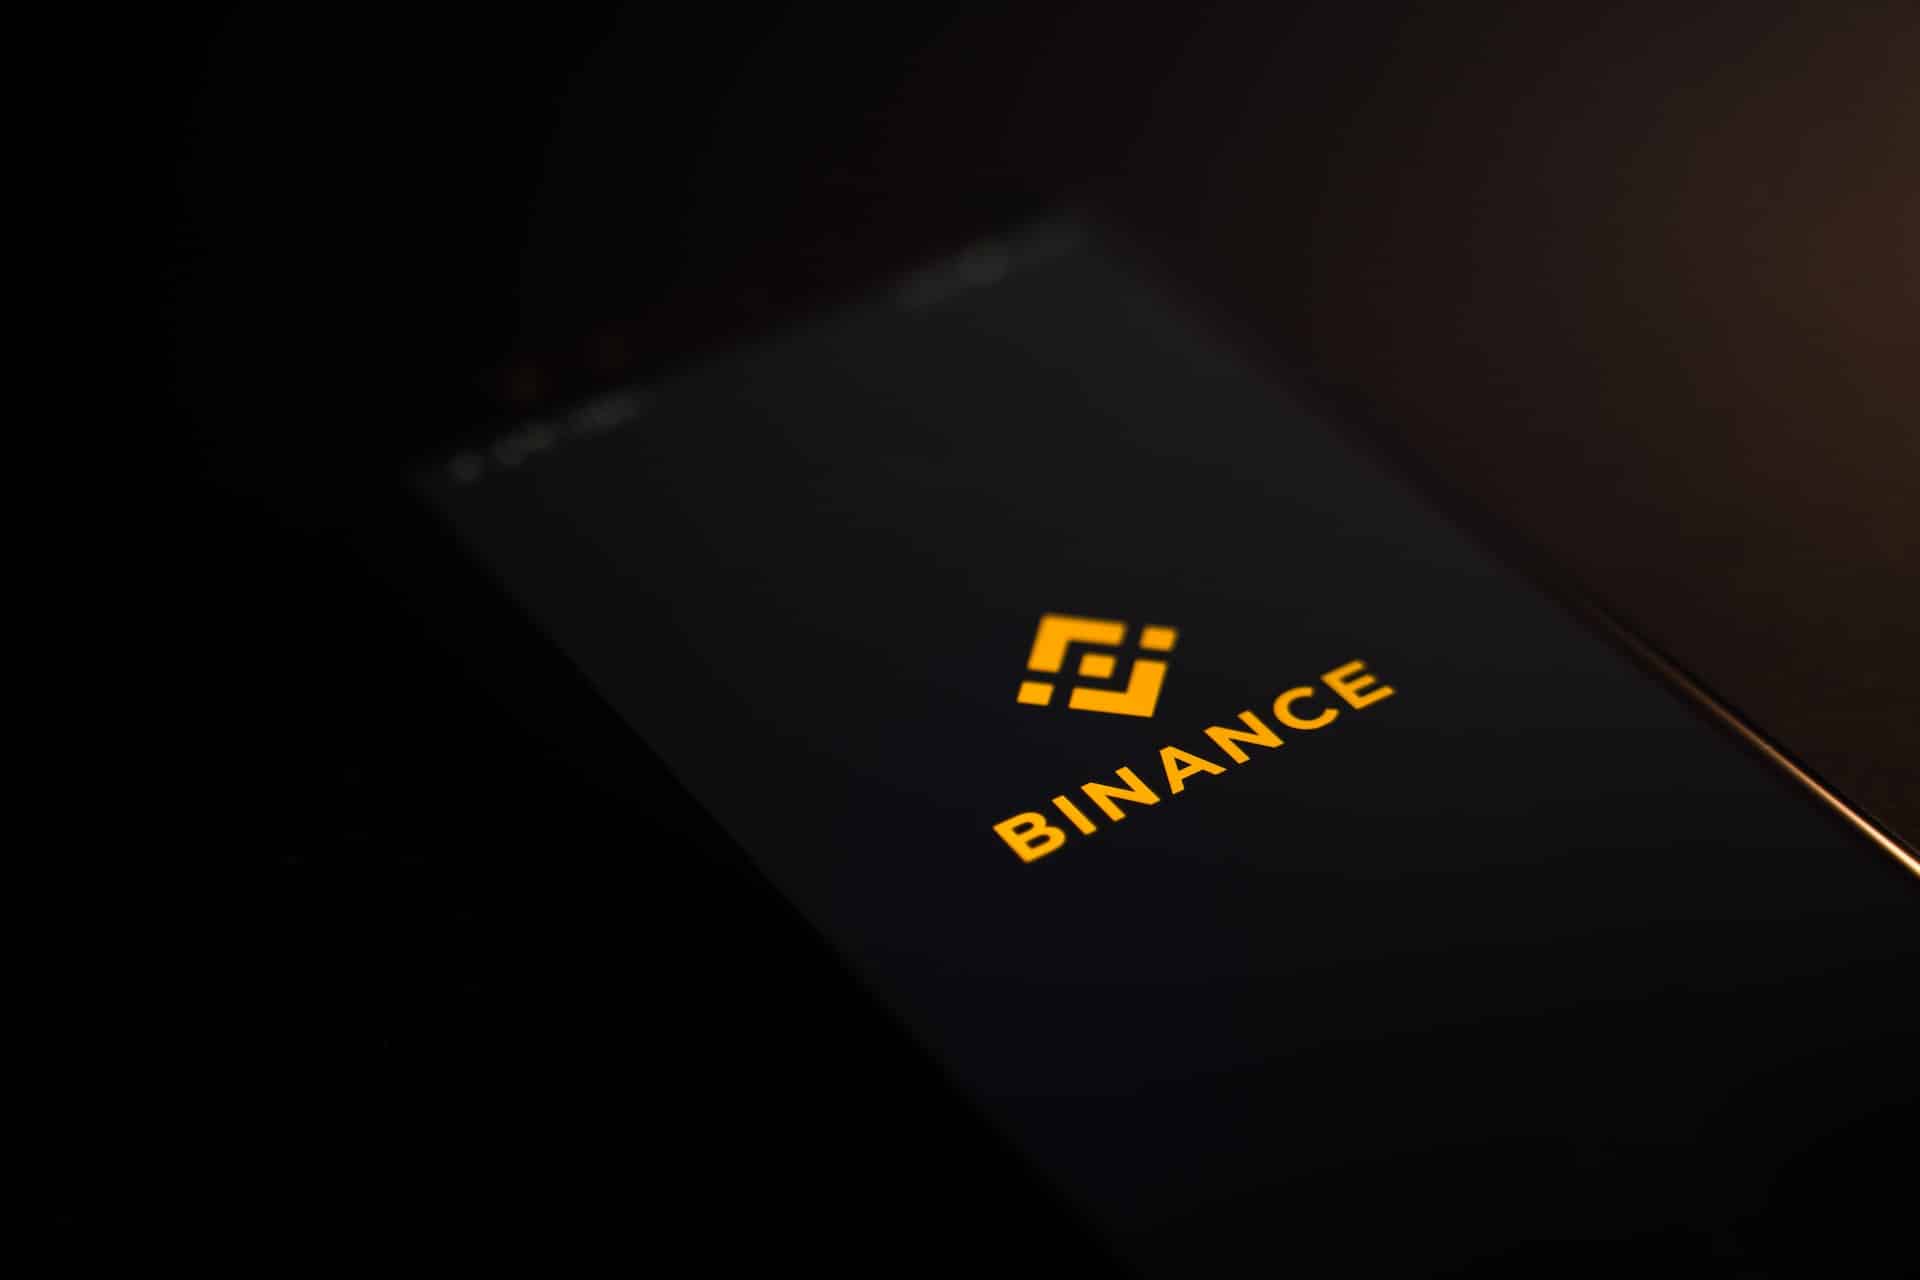 Binance Threatens Delisting of 10 Privacy Coins, Including Monero and Zcash Amid Regulatory Crackdown